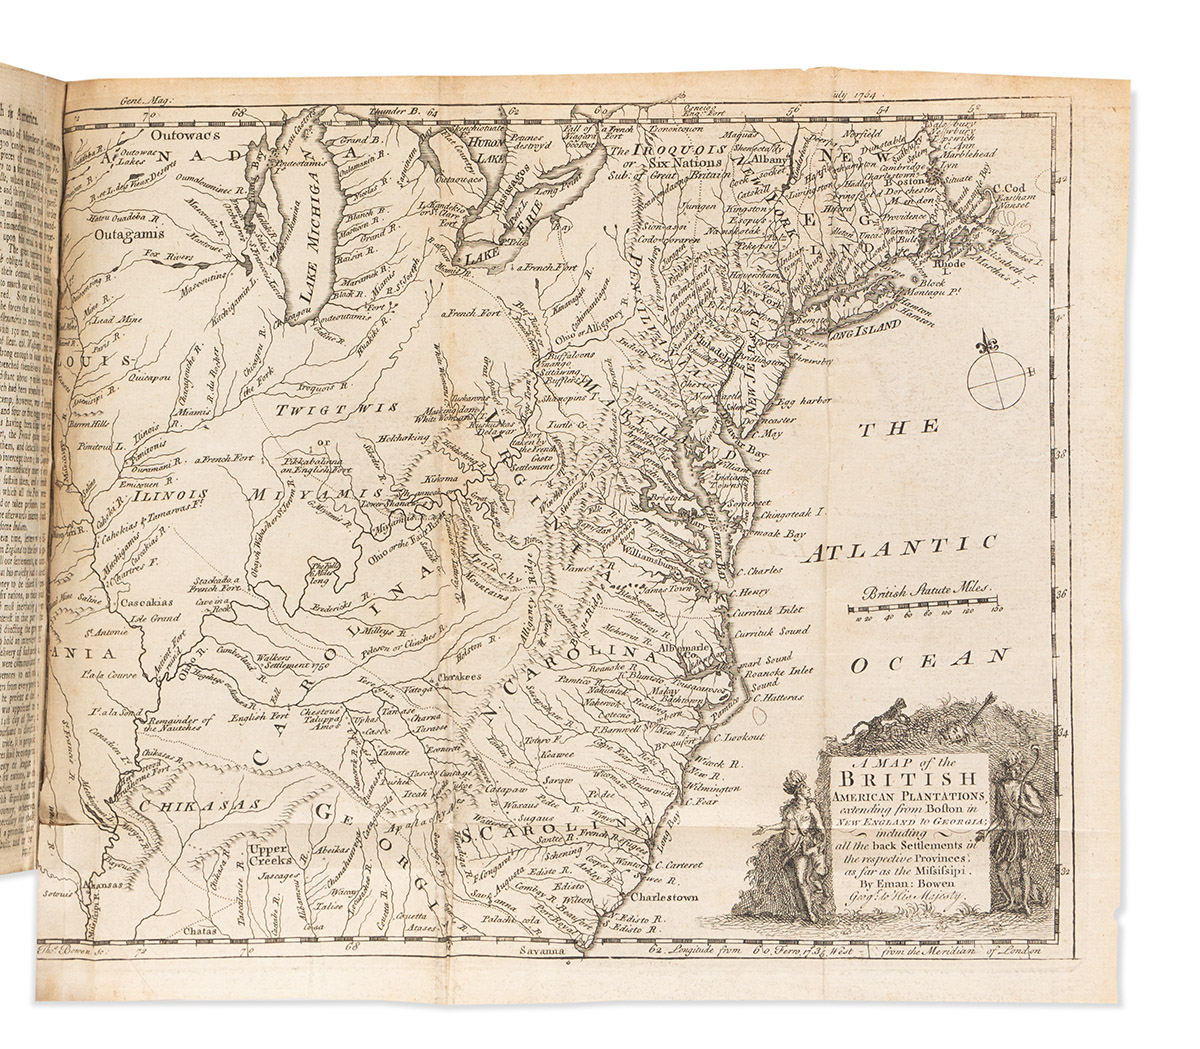 (GEORGE WASHINGTON.) Bound volume of Gentlemans Magazine, with coverage of Washingtons expedition to Ohio and related map.